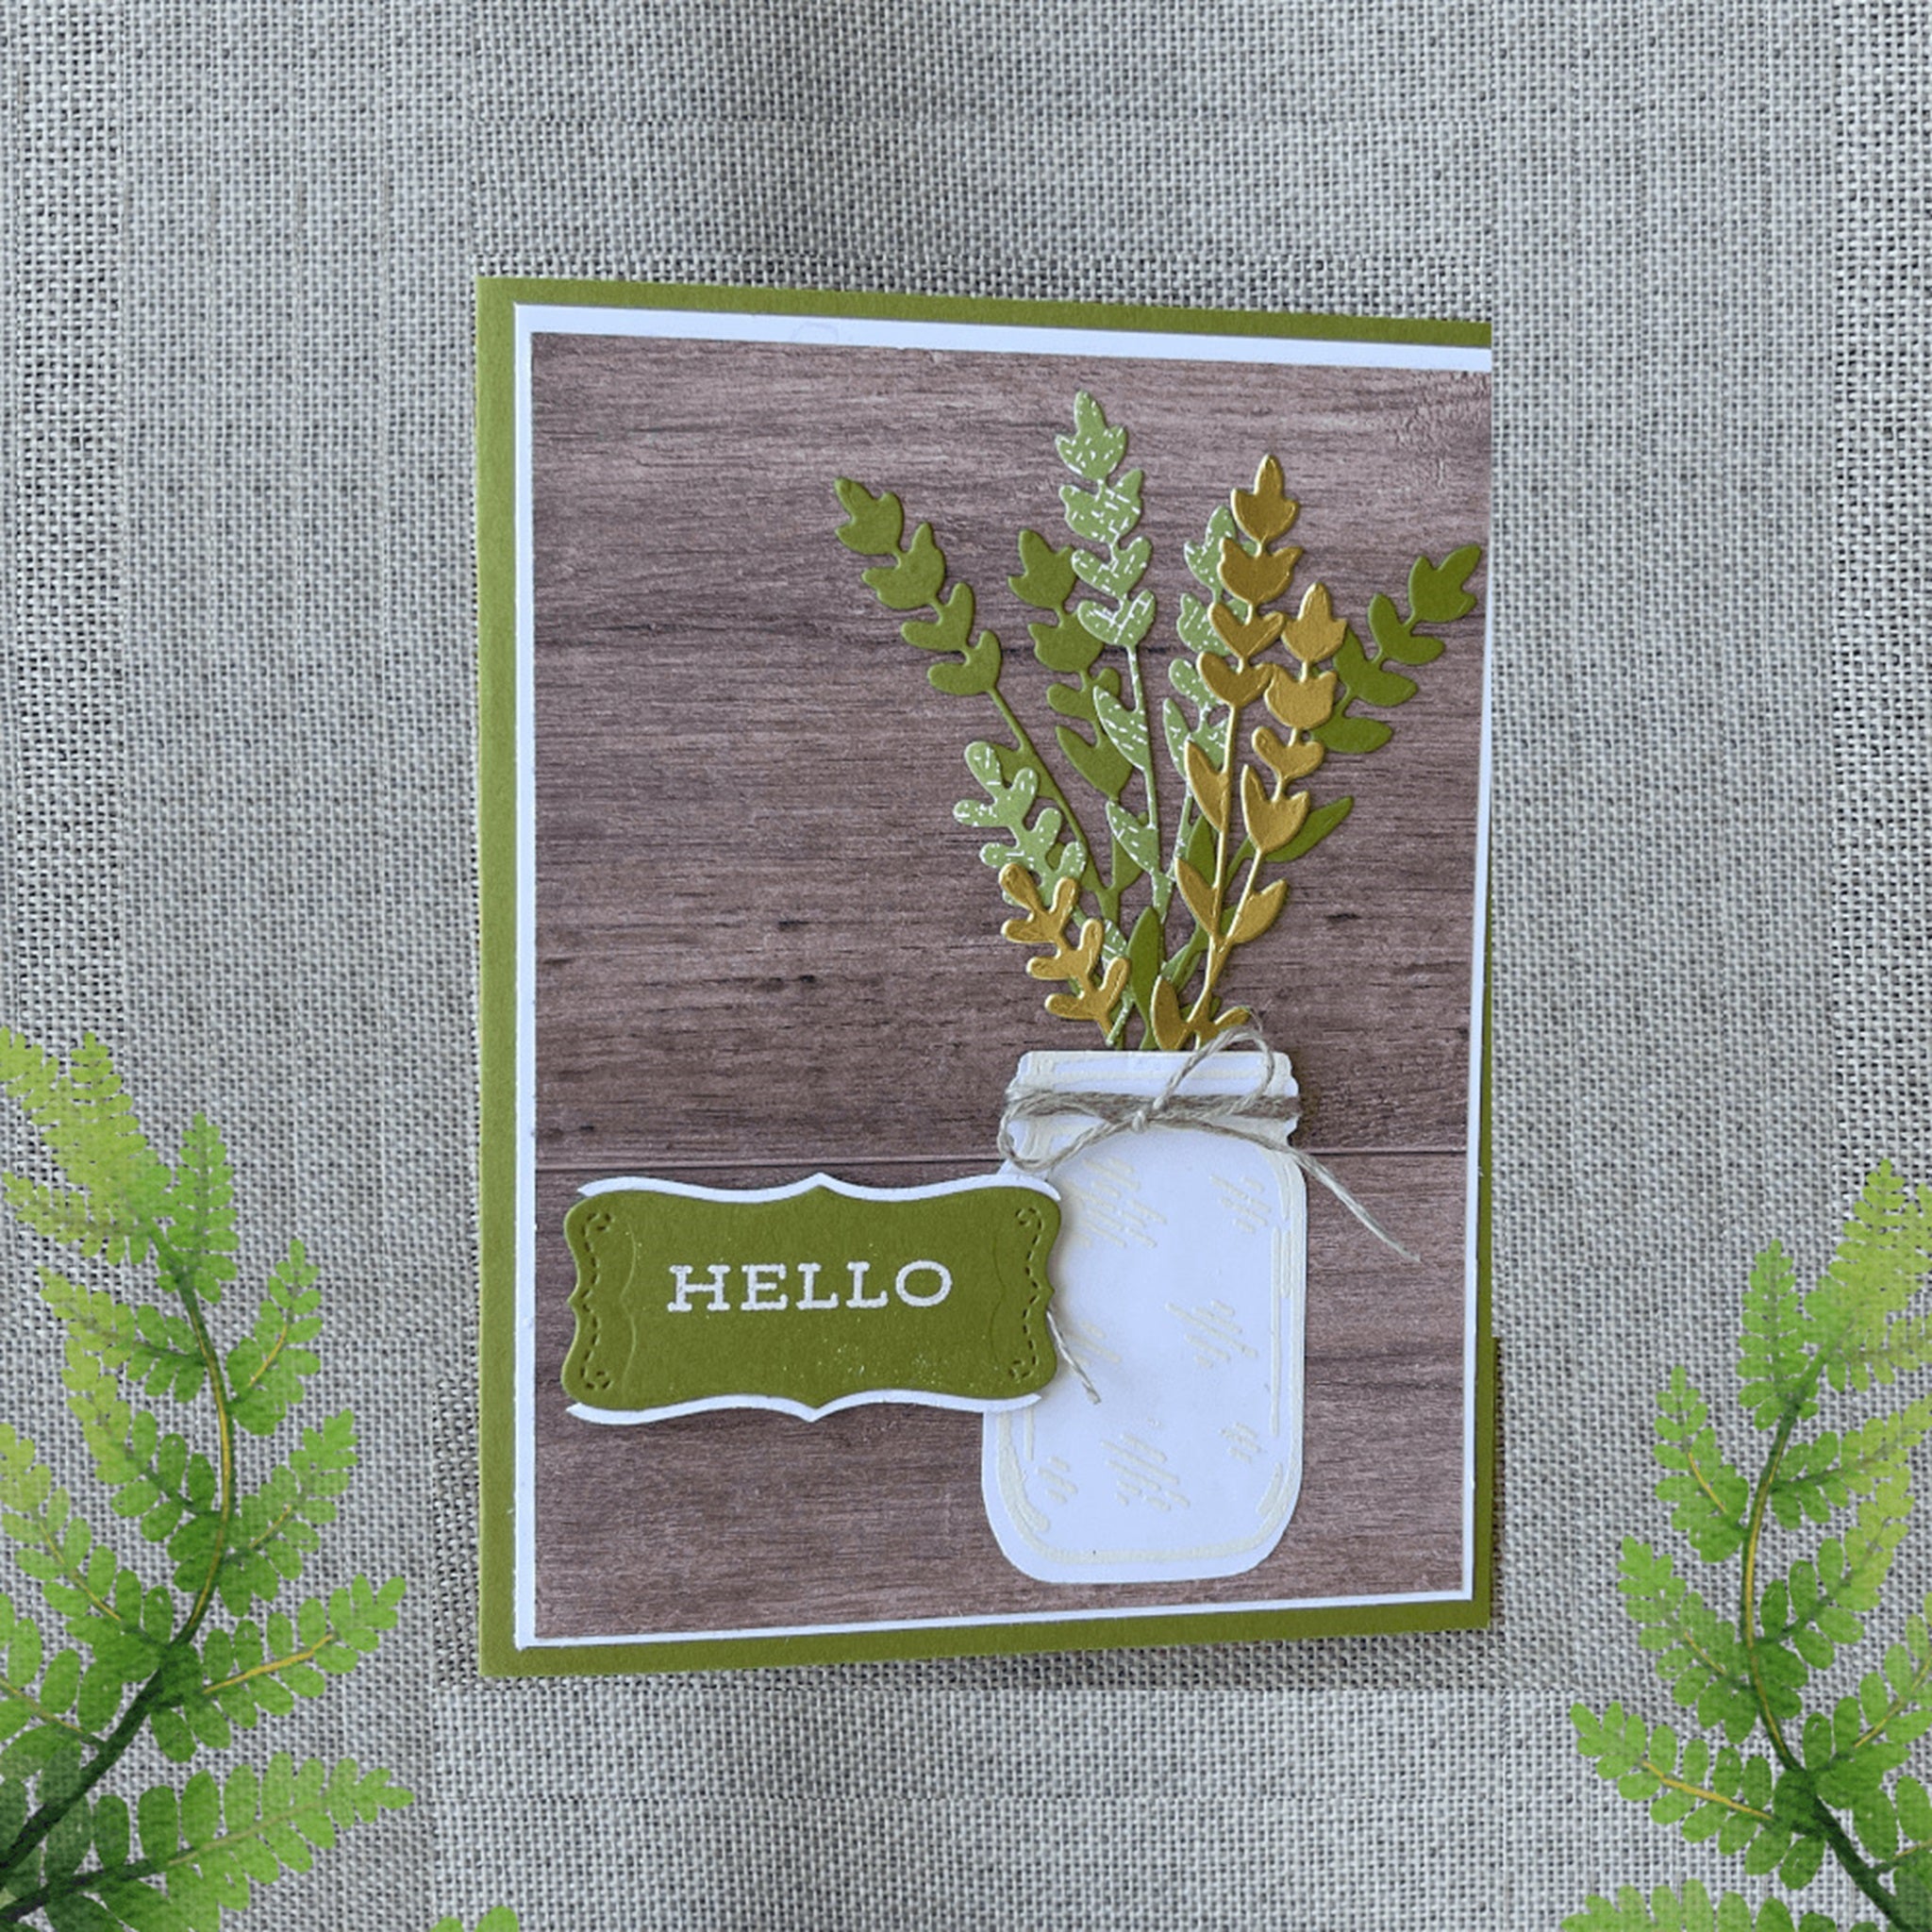 Hello Greeting Card: Handcrafted Greeting Card to spread joy